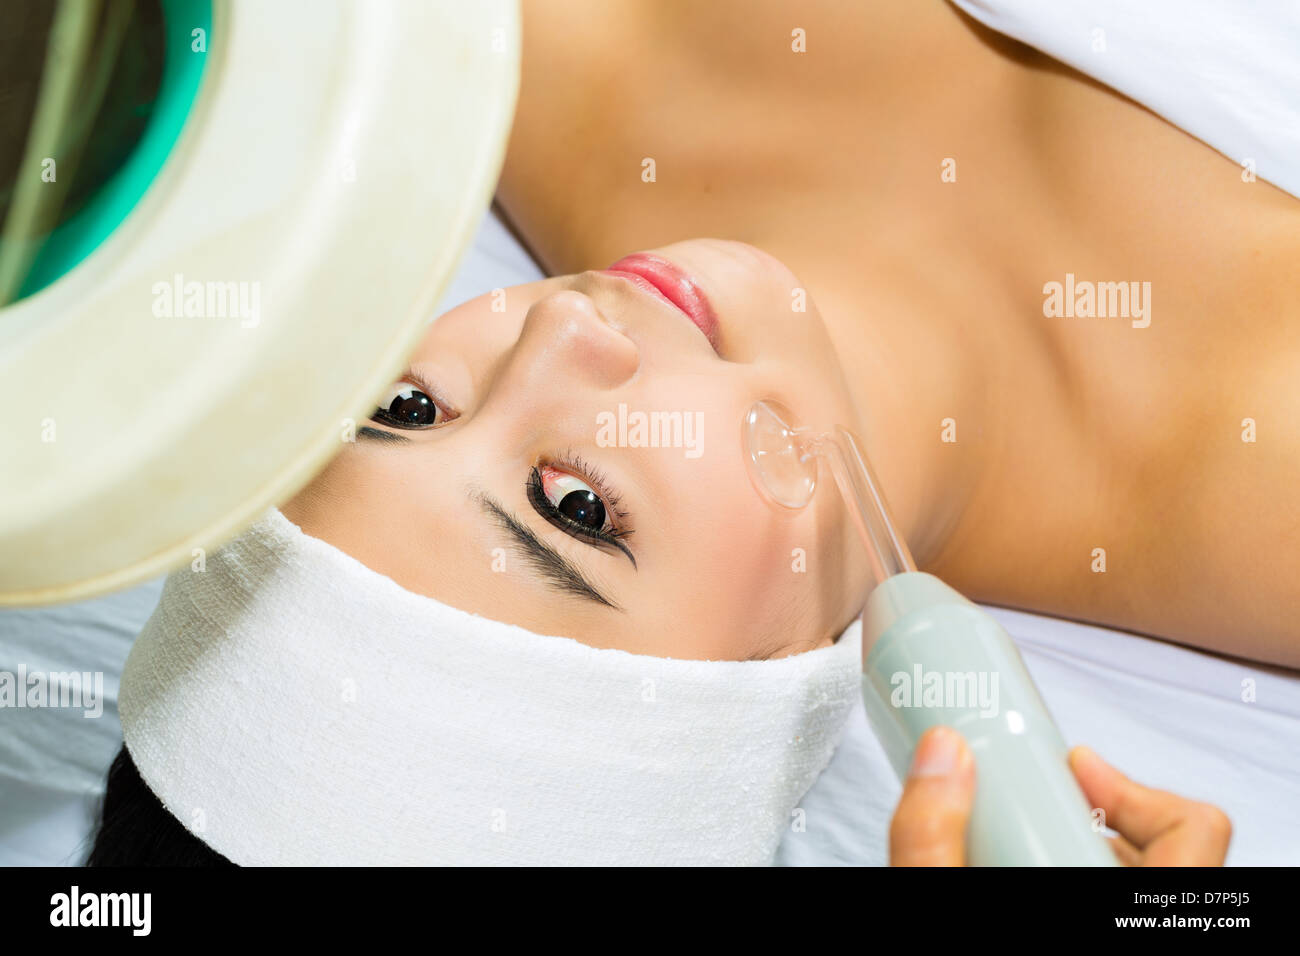 Asian Woman lies in a beauty spa getting a treatment Stock Photo